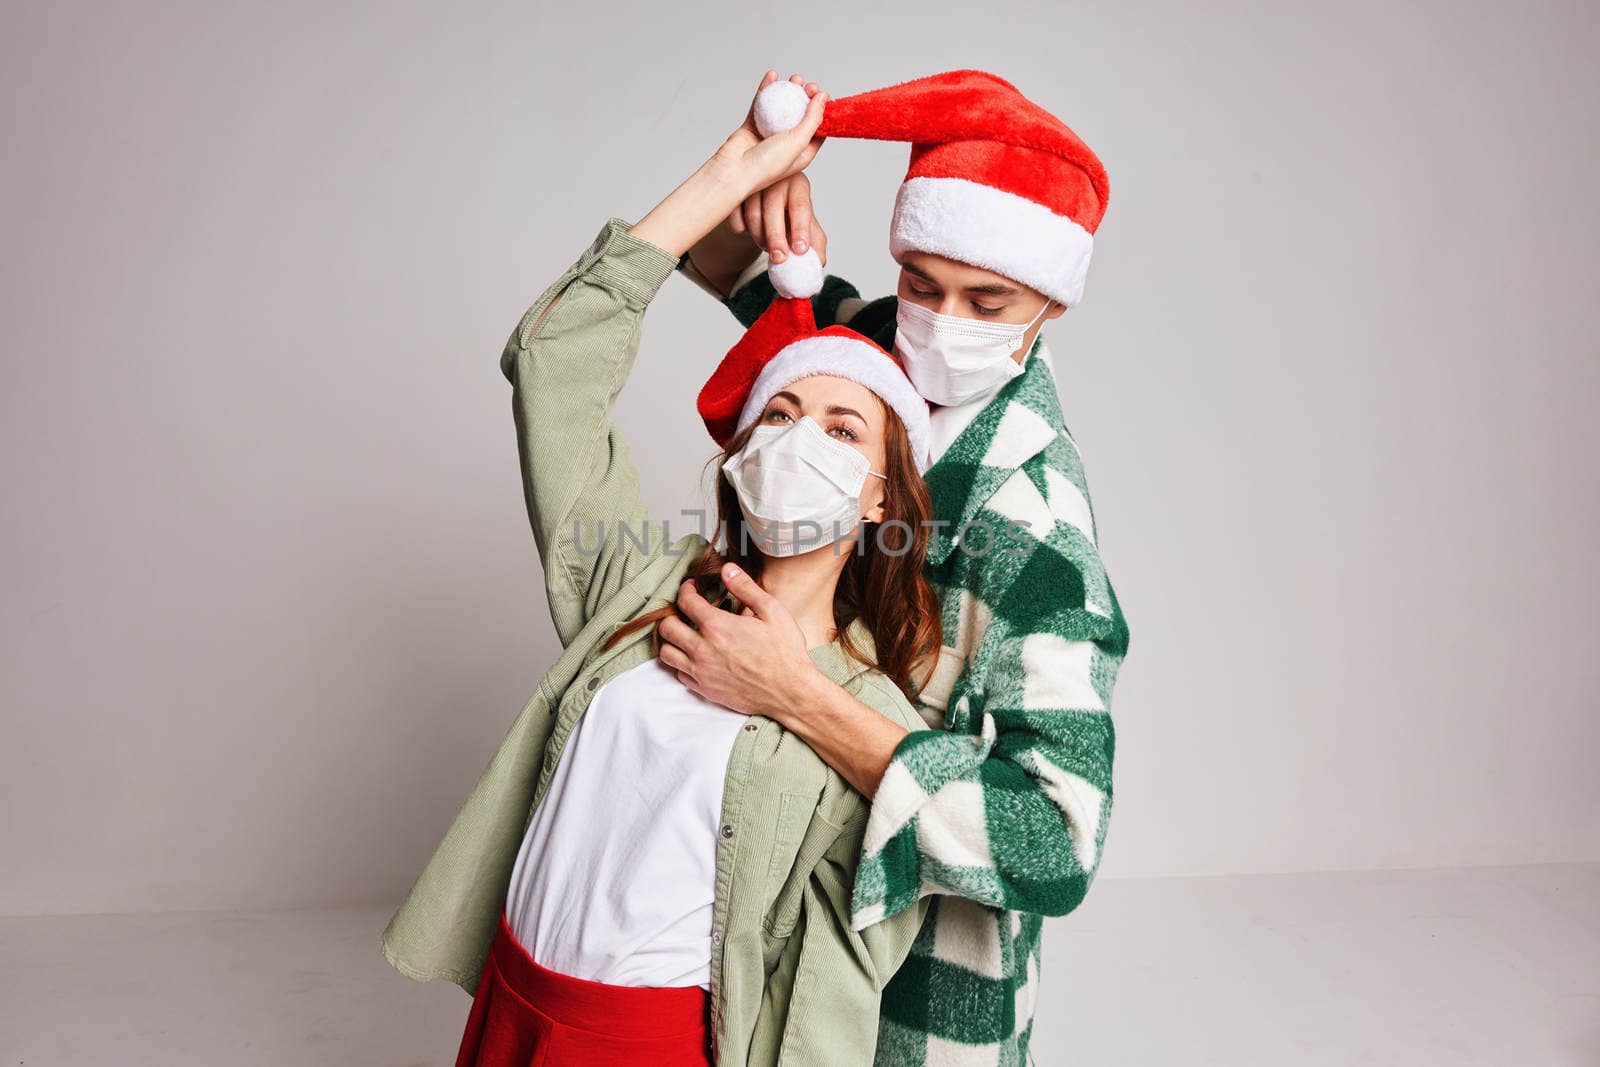 Man and woman embrace fun and holiday medical New Year masks by SHOTPRIME